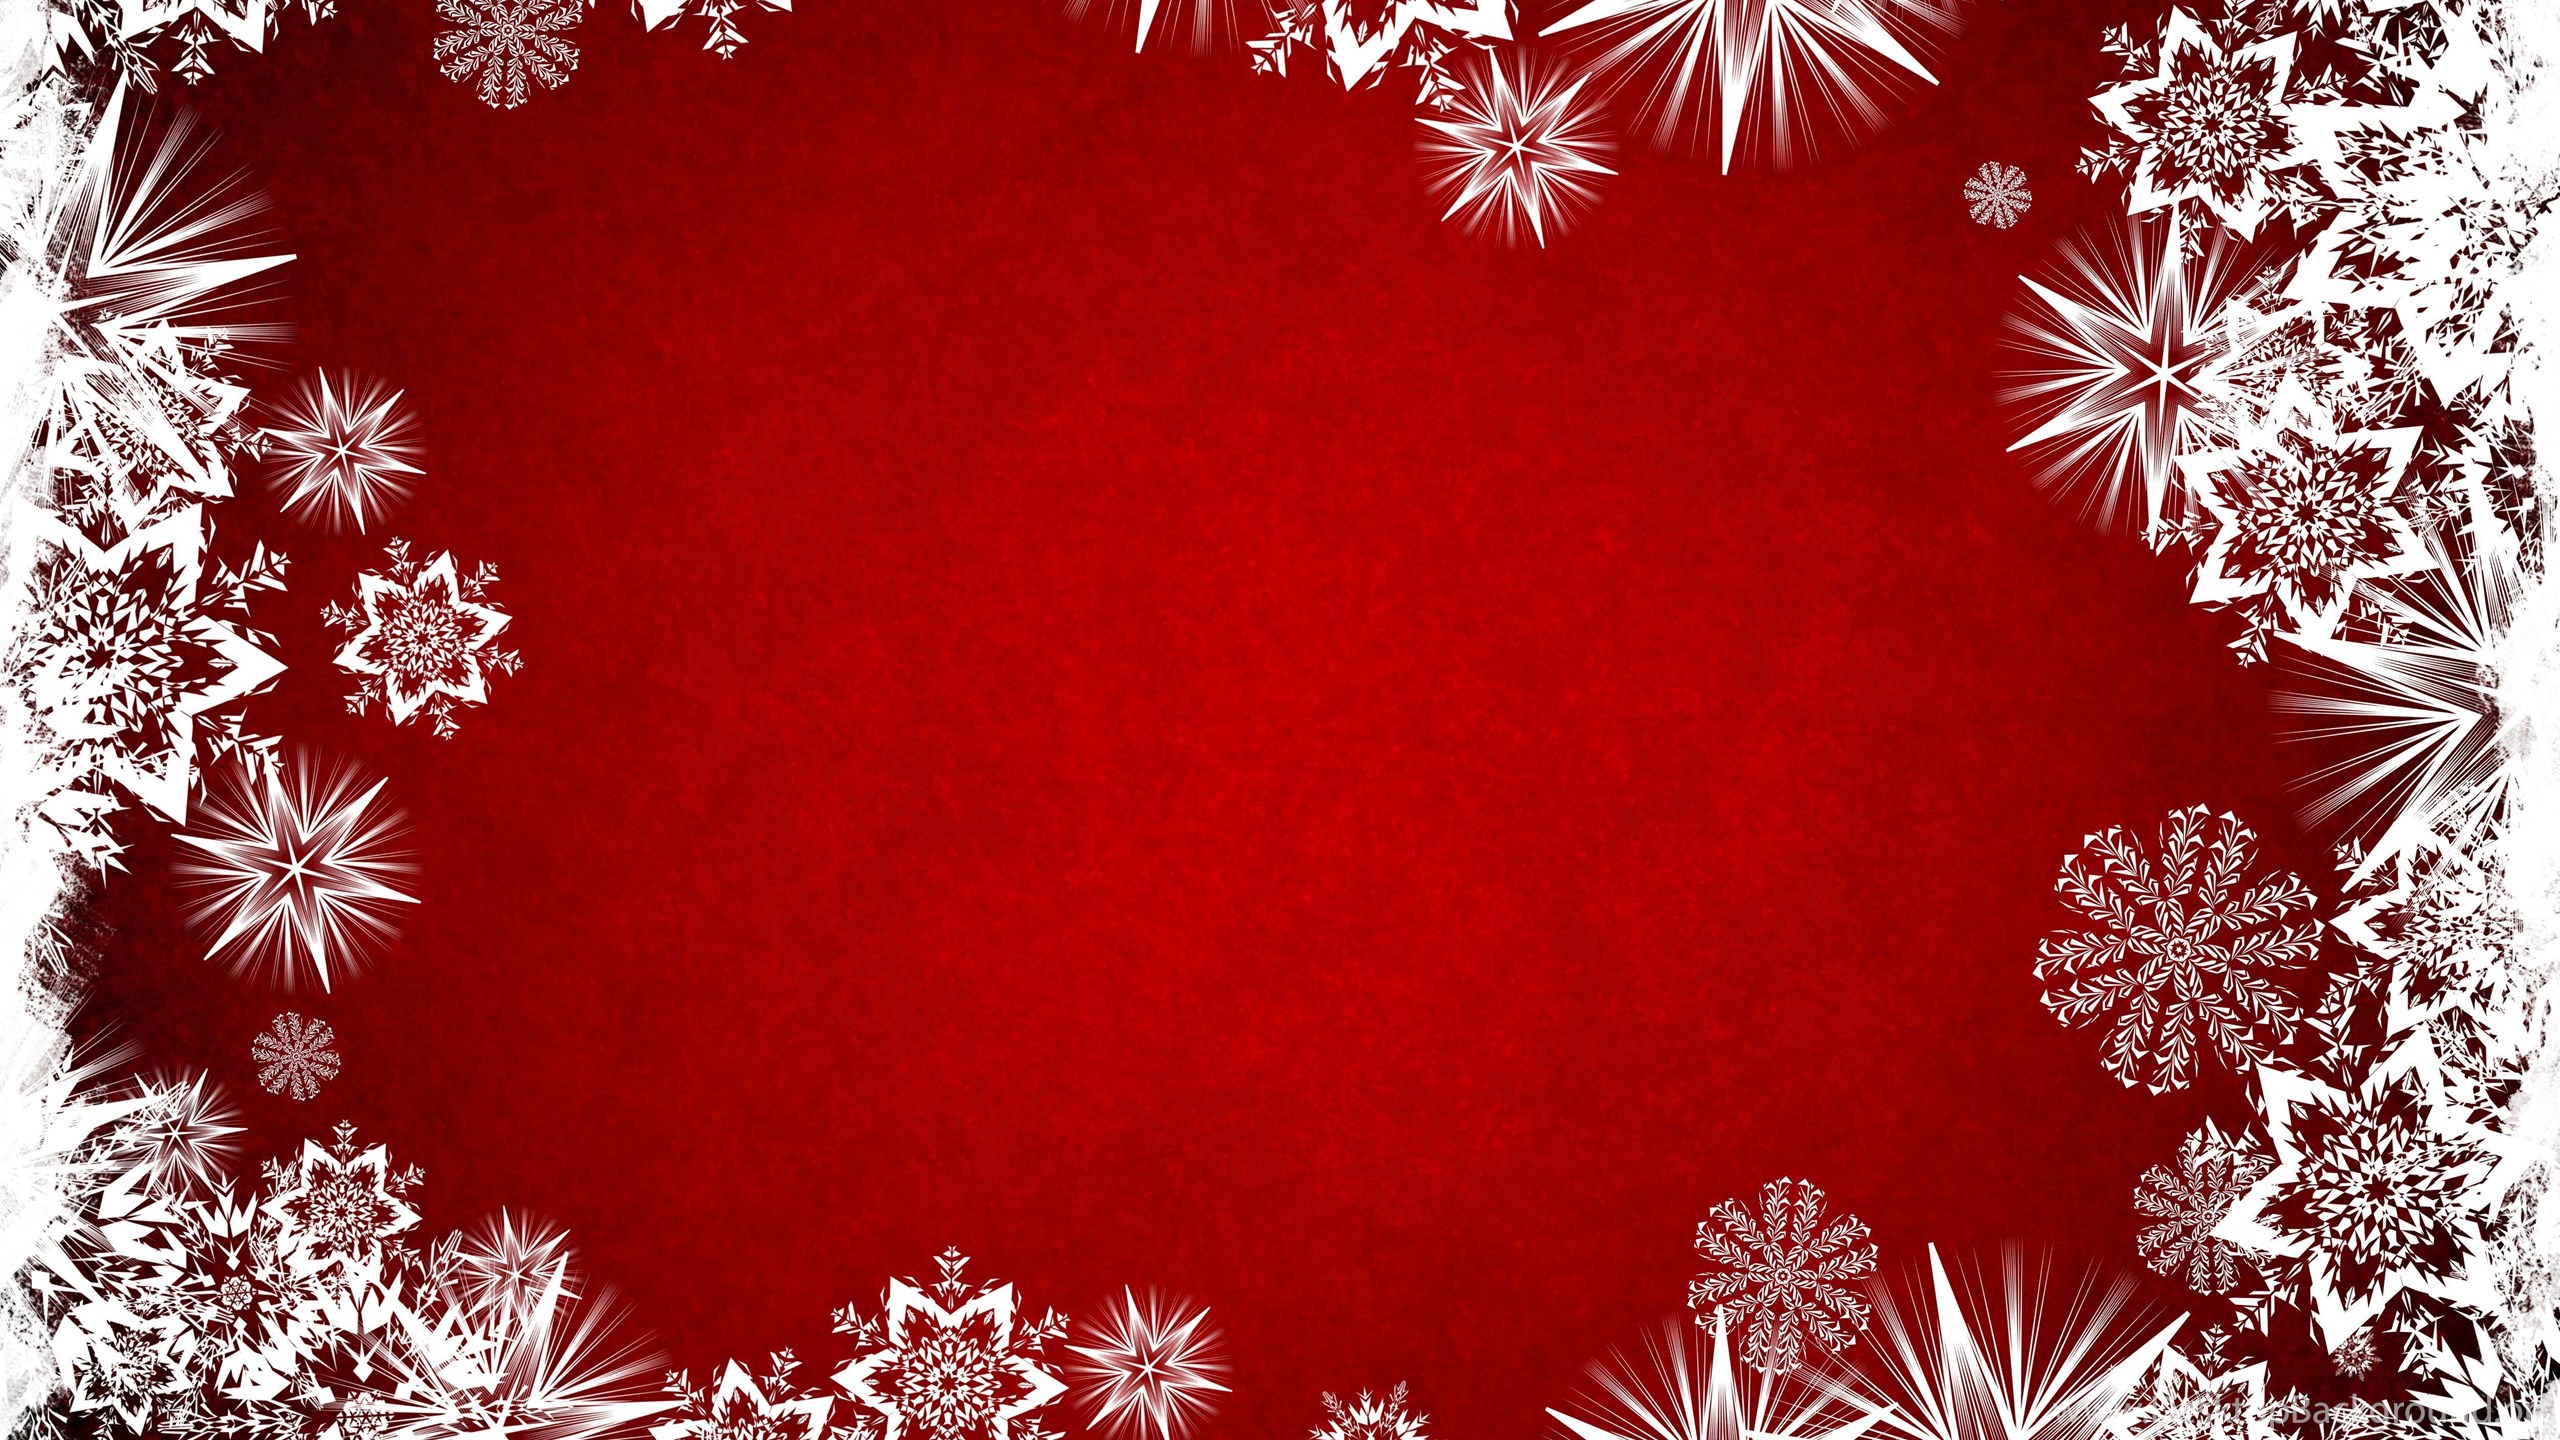 11-red-xmas-wallpaper-background